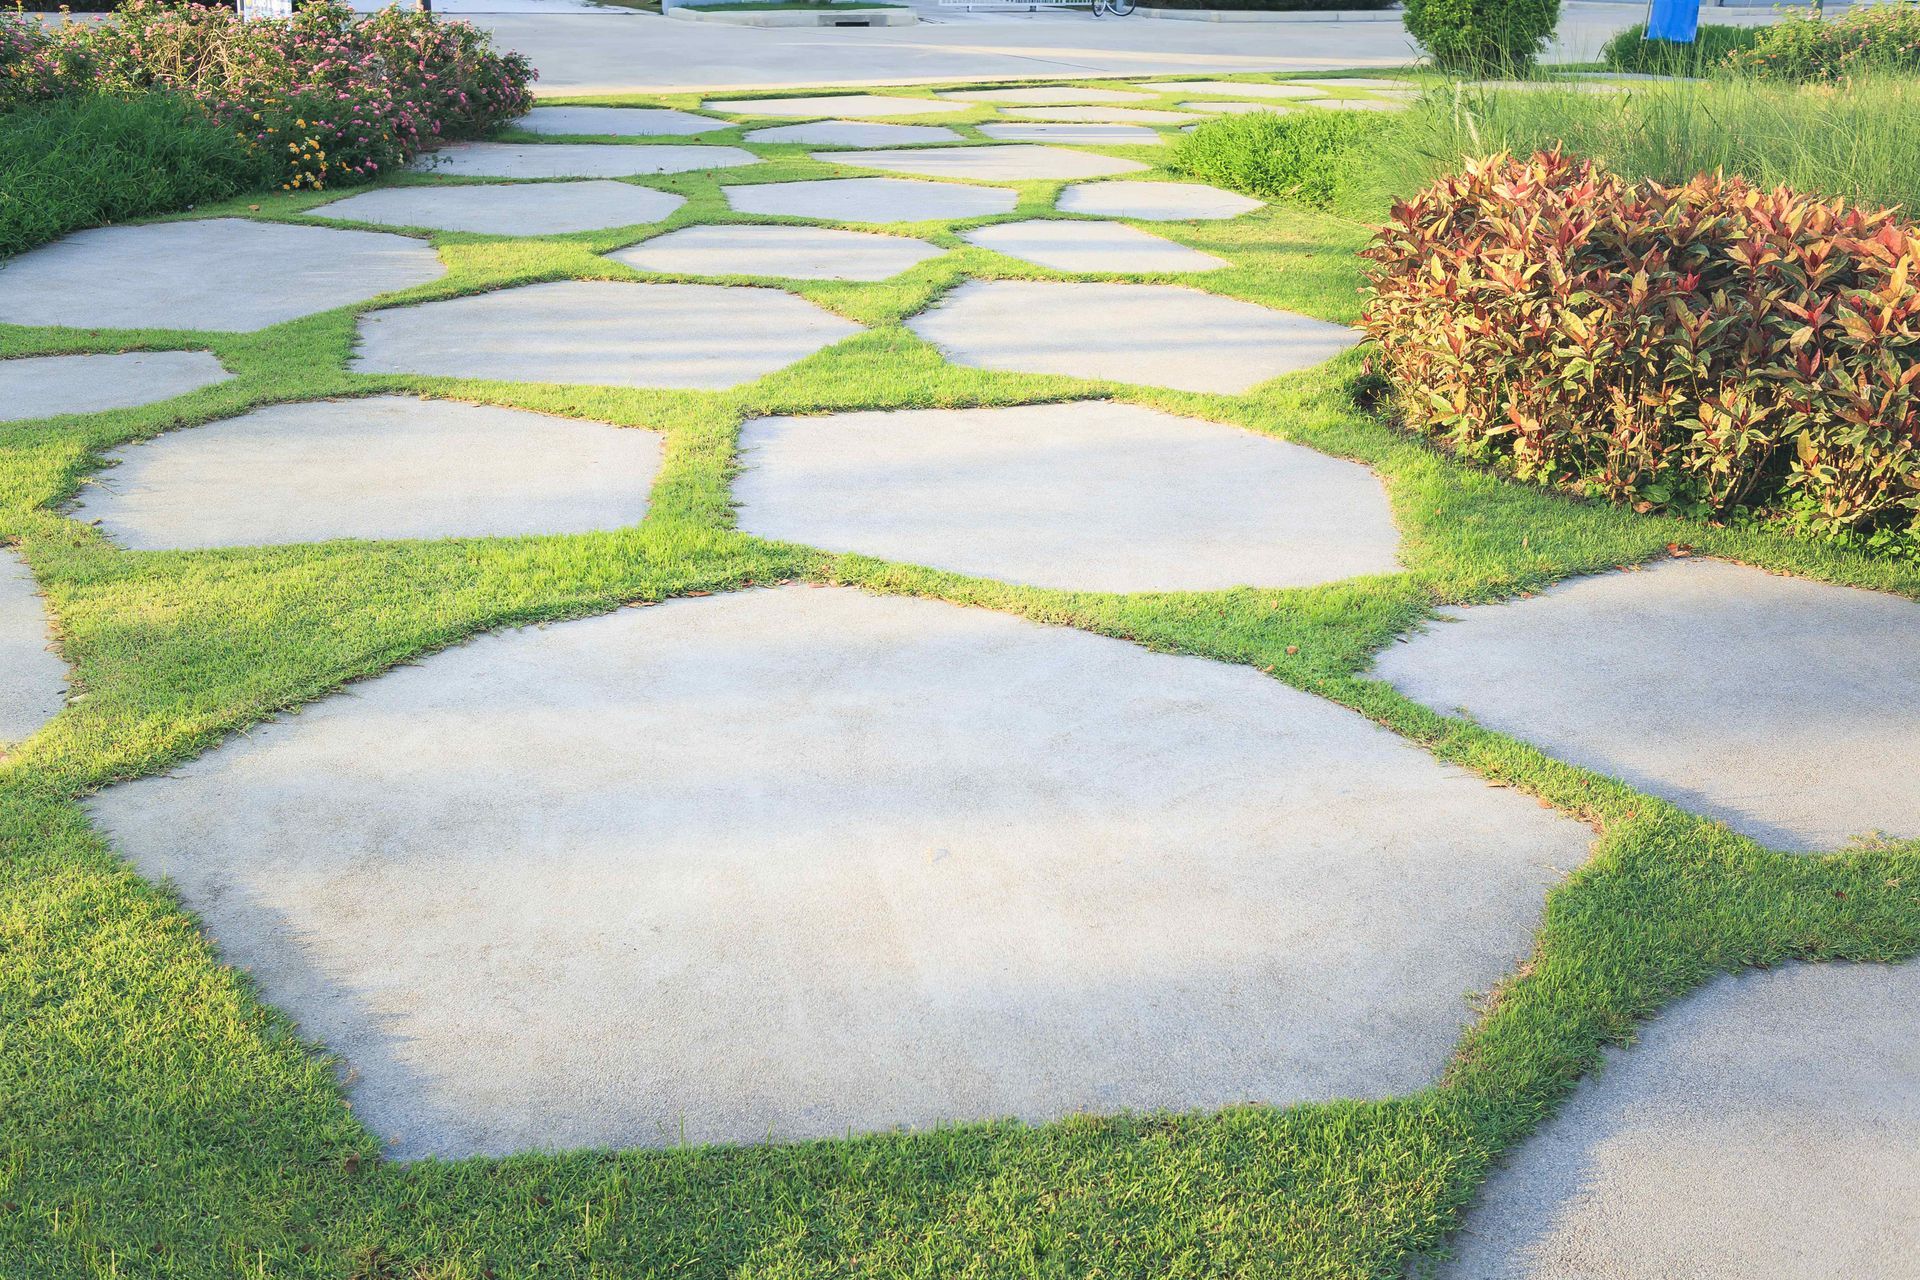 Large odd shaped pavers on grass with garden beds to each side.